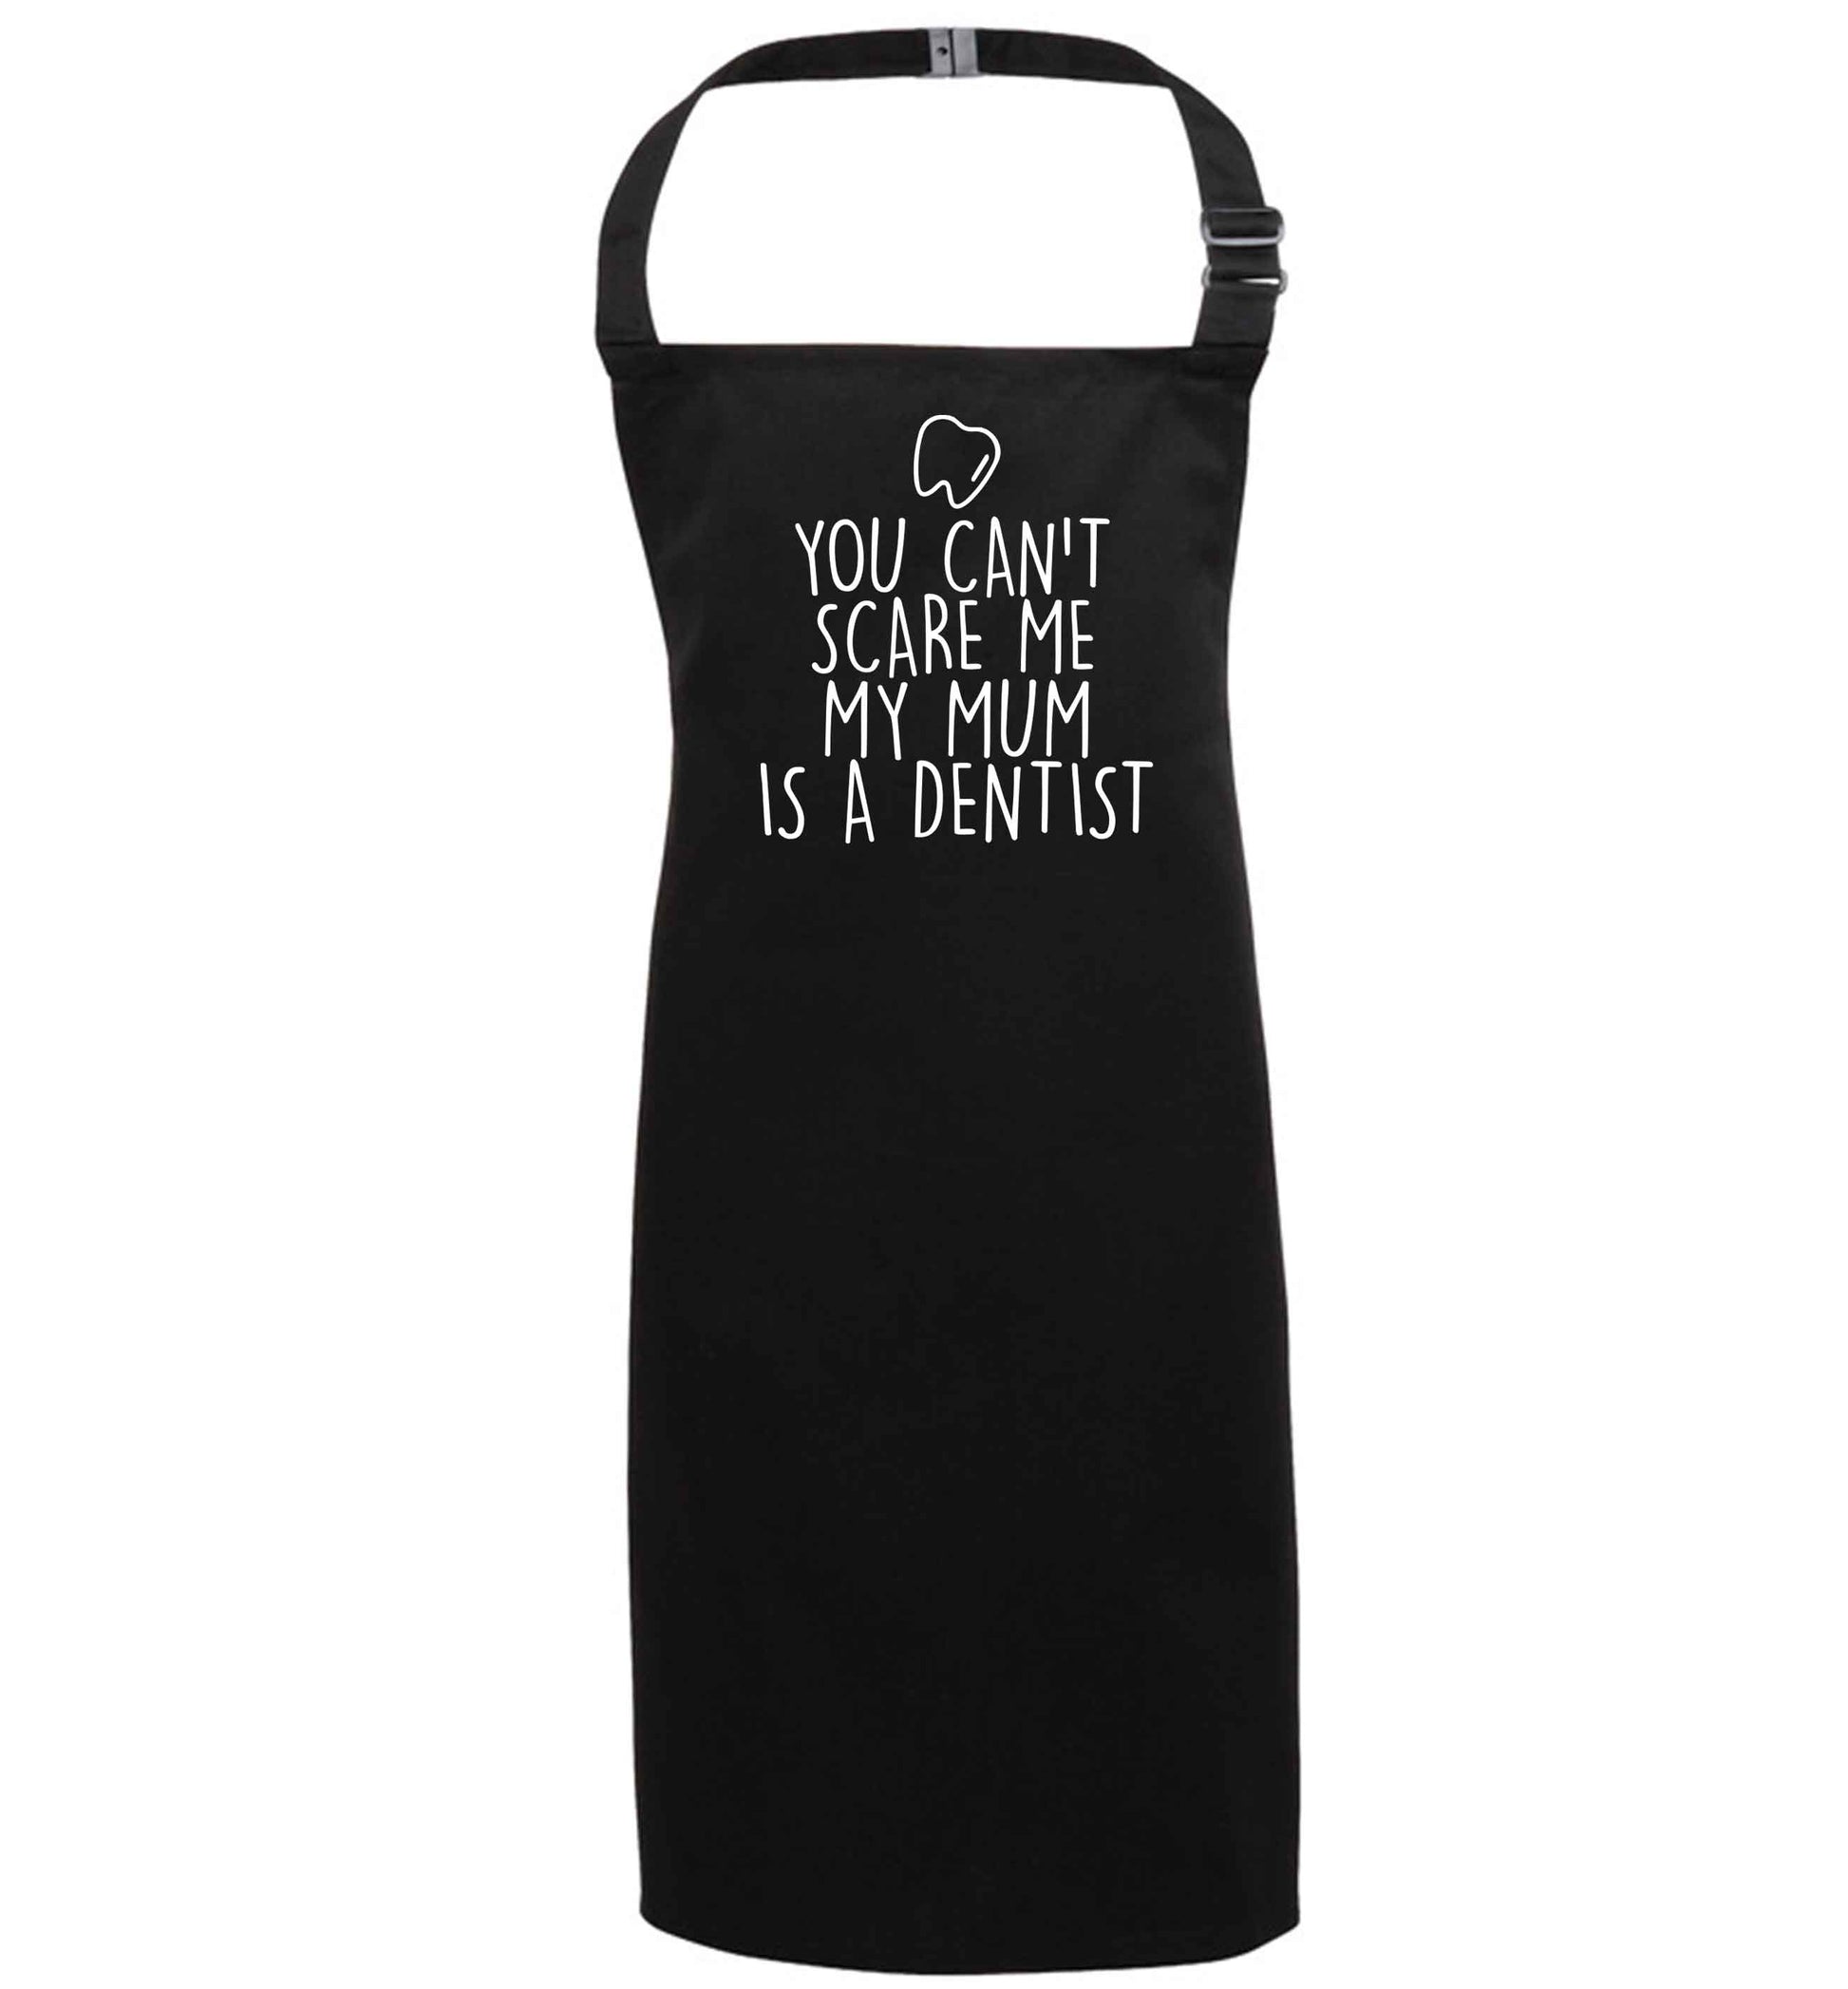 Minty Kisses Tooth Fairy (a) black apron 7-10 years